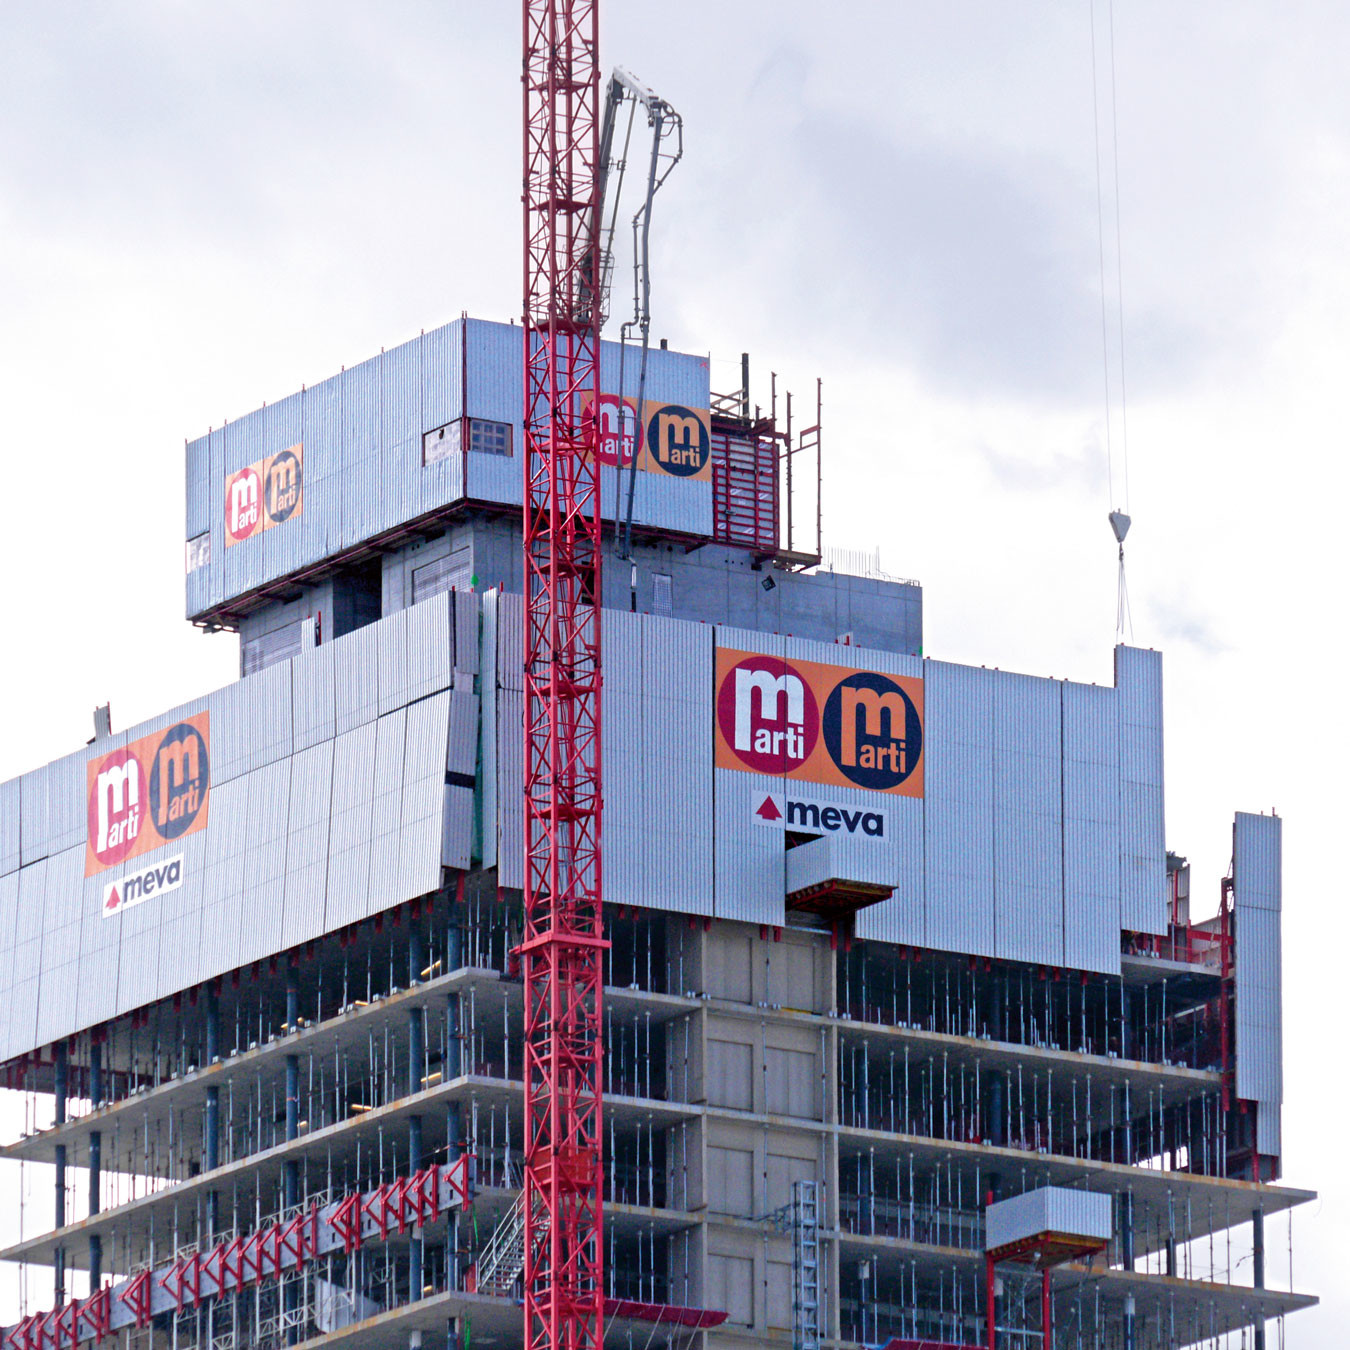 A view of climbing formwork with a screen system fitted